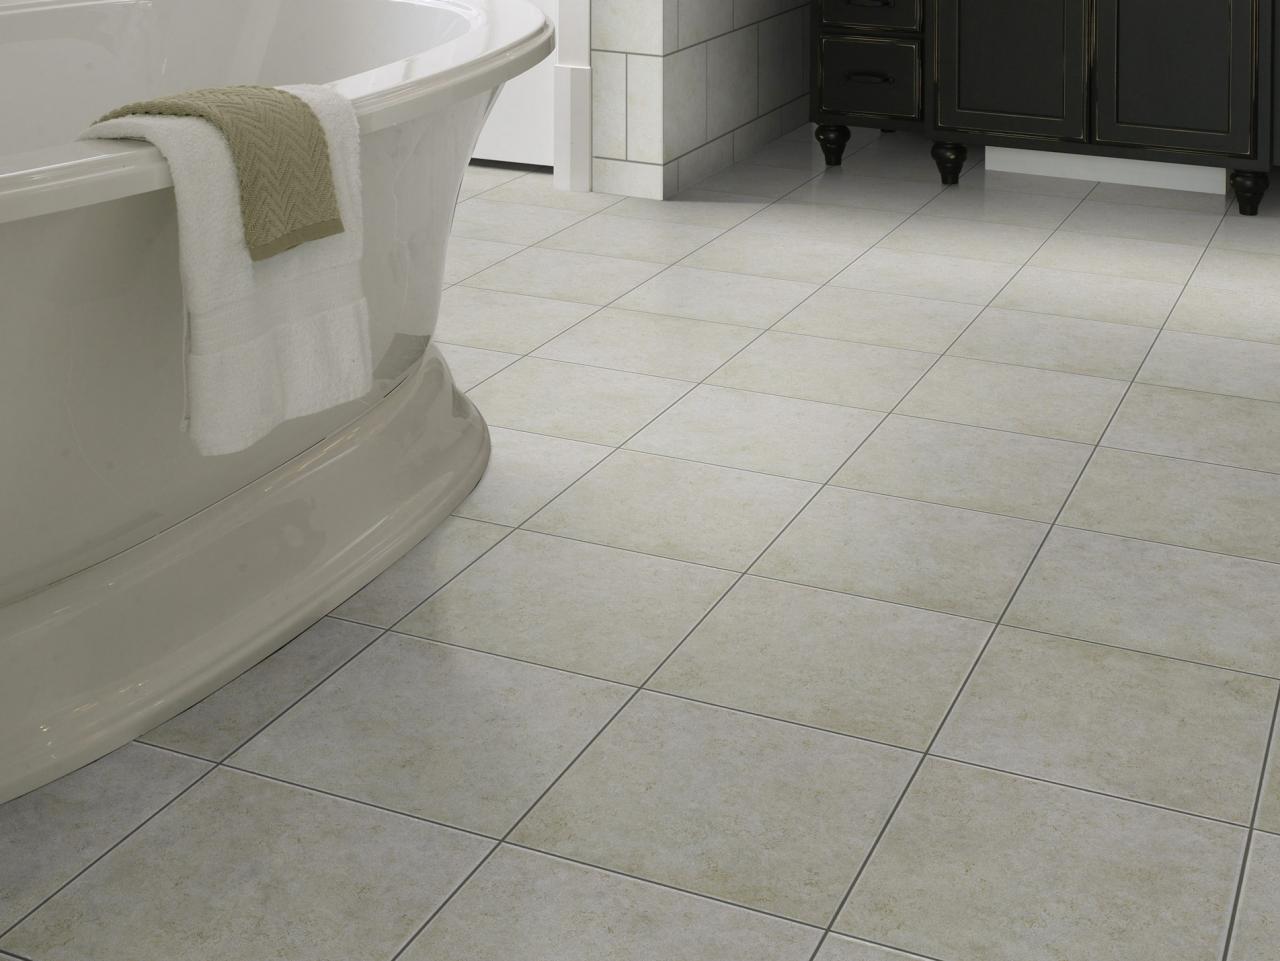 Why Homeowners Love Ceramic Tile, Bathroom Floor Tile Pictures